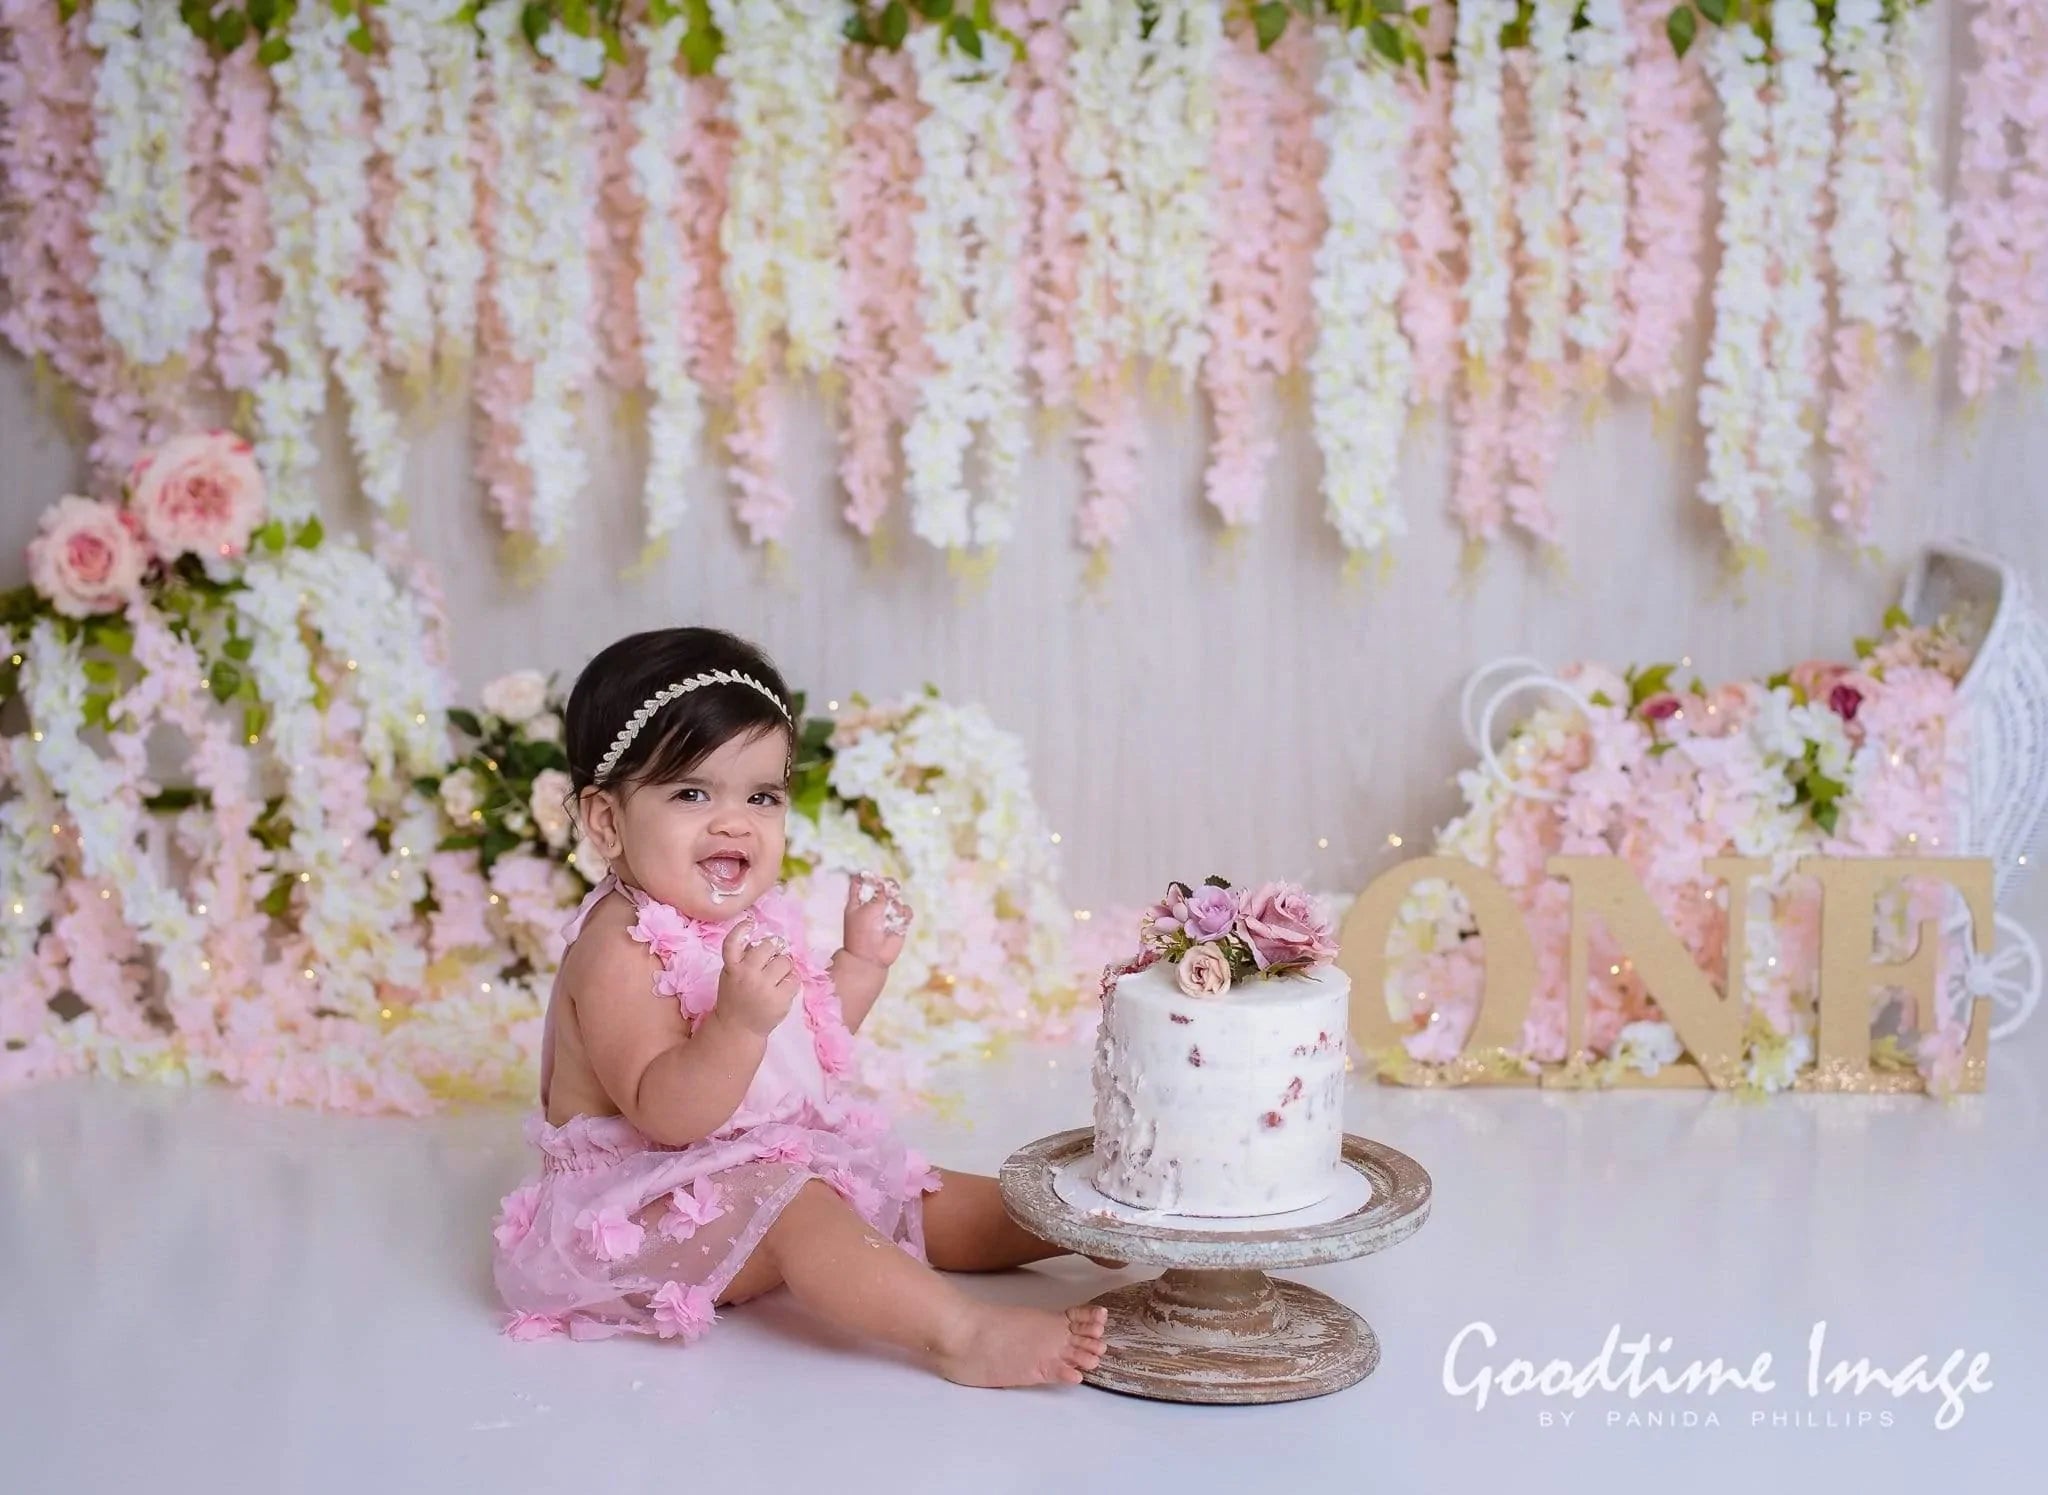 Allenjoy Pink and White Floral Baby Carriage Backdrop for Valentine's Day Designed by Panida Phillips - Allenjoystudio